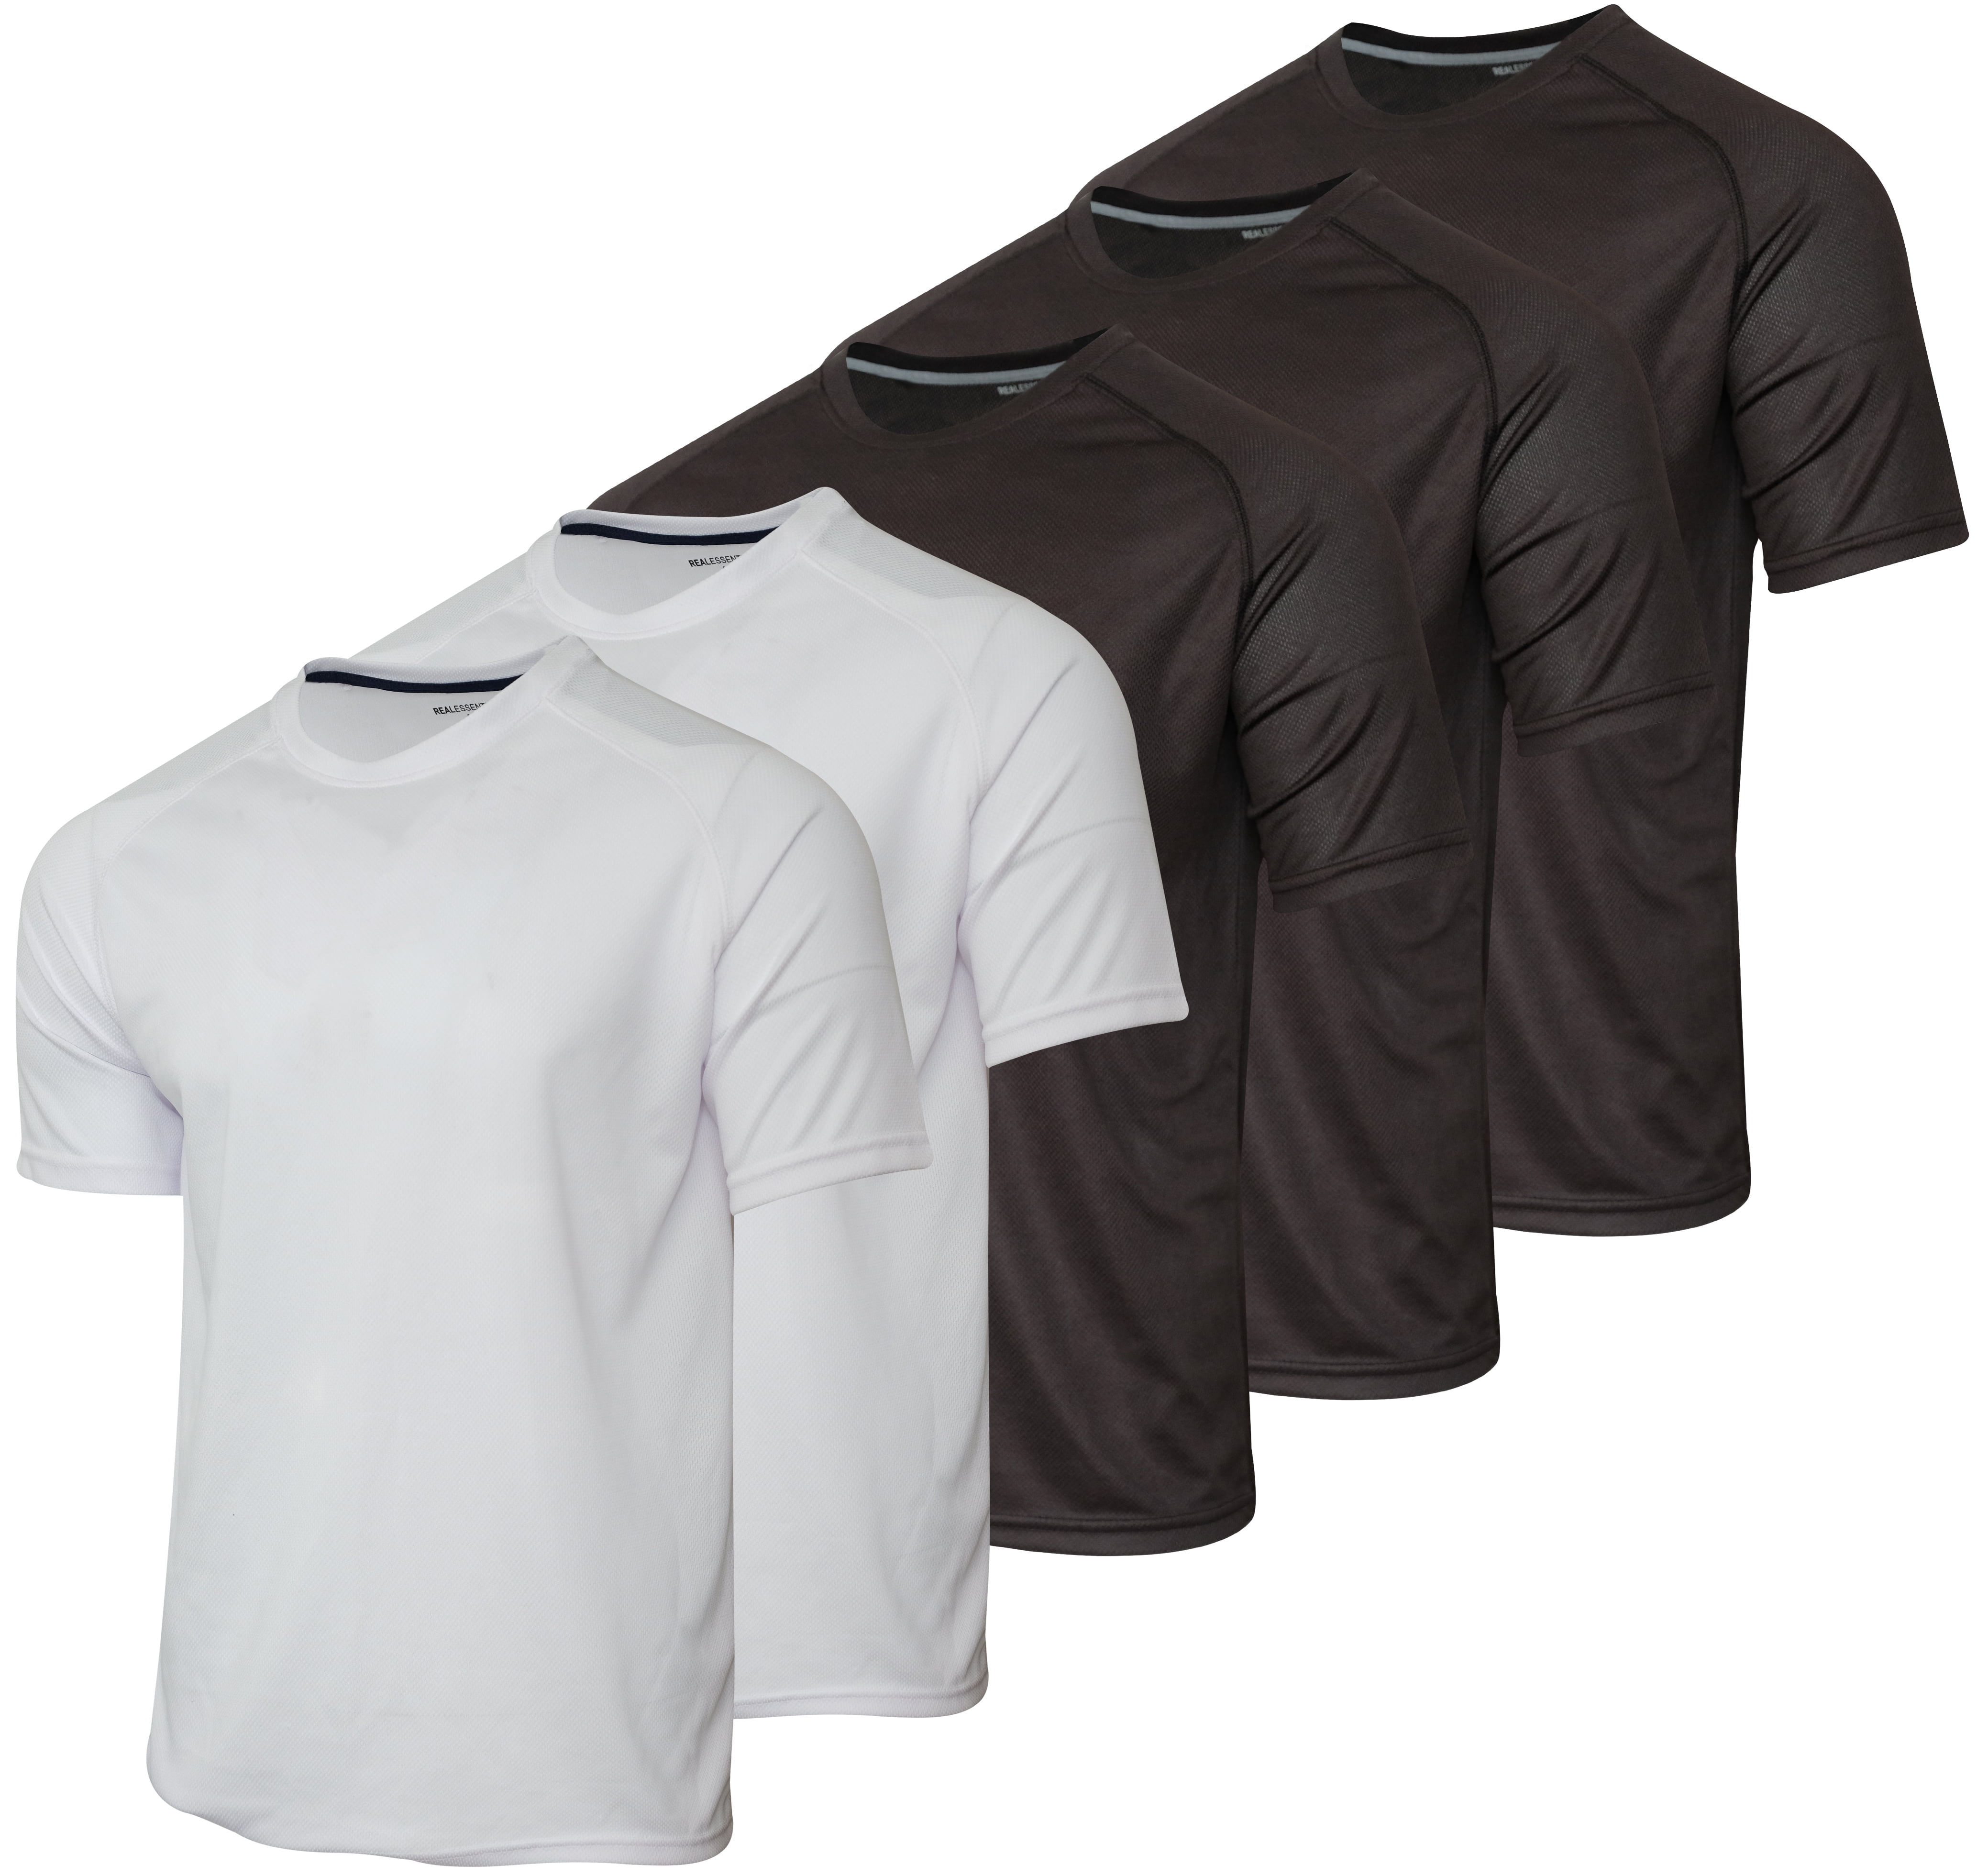 FOR Men Kreator Quick Drying Dry-Fit Short Sleeve Athletic Shirt